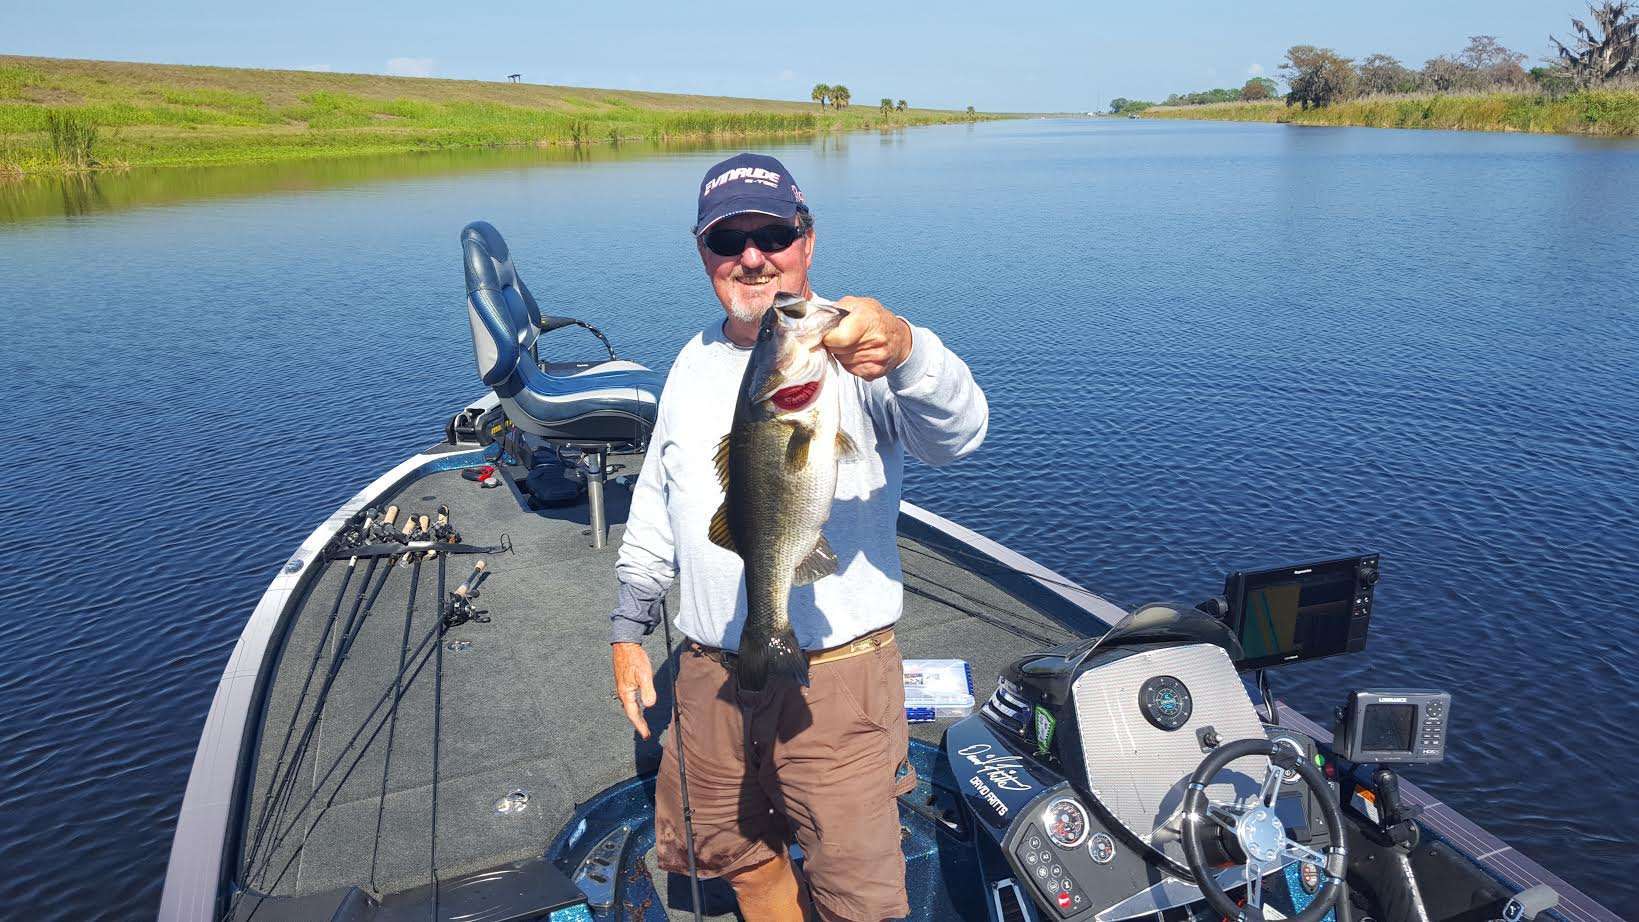 Throw your crankbaits on the right line - Bassmaster